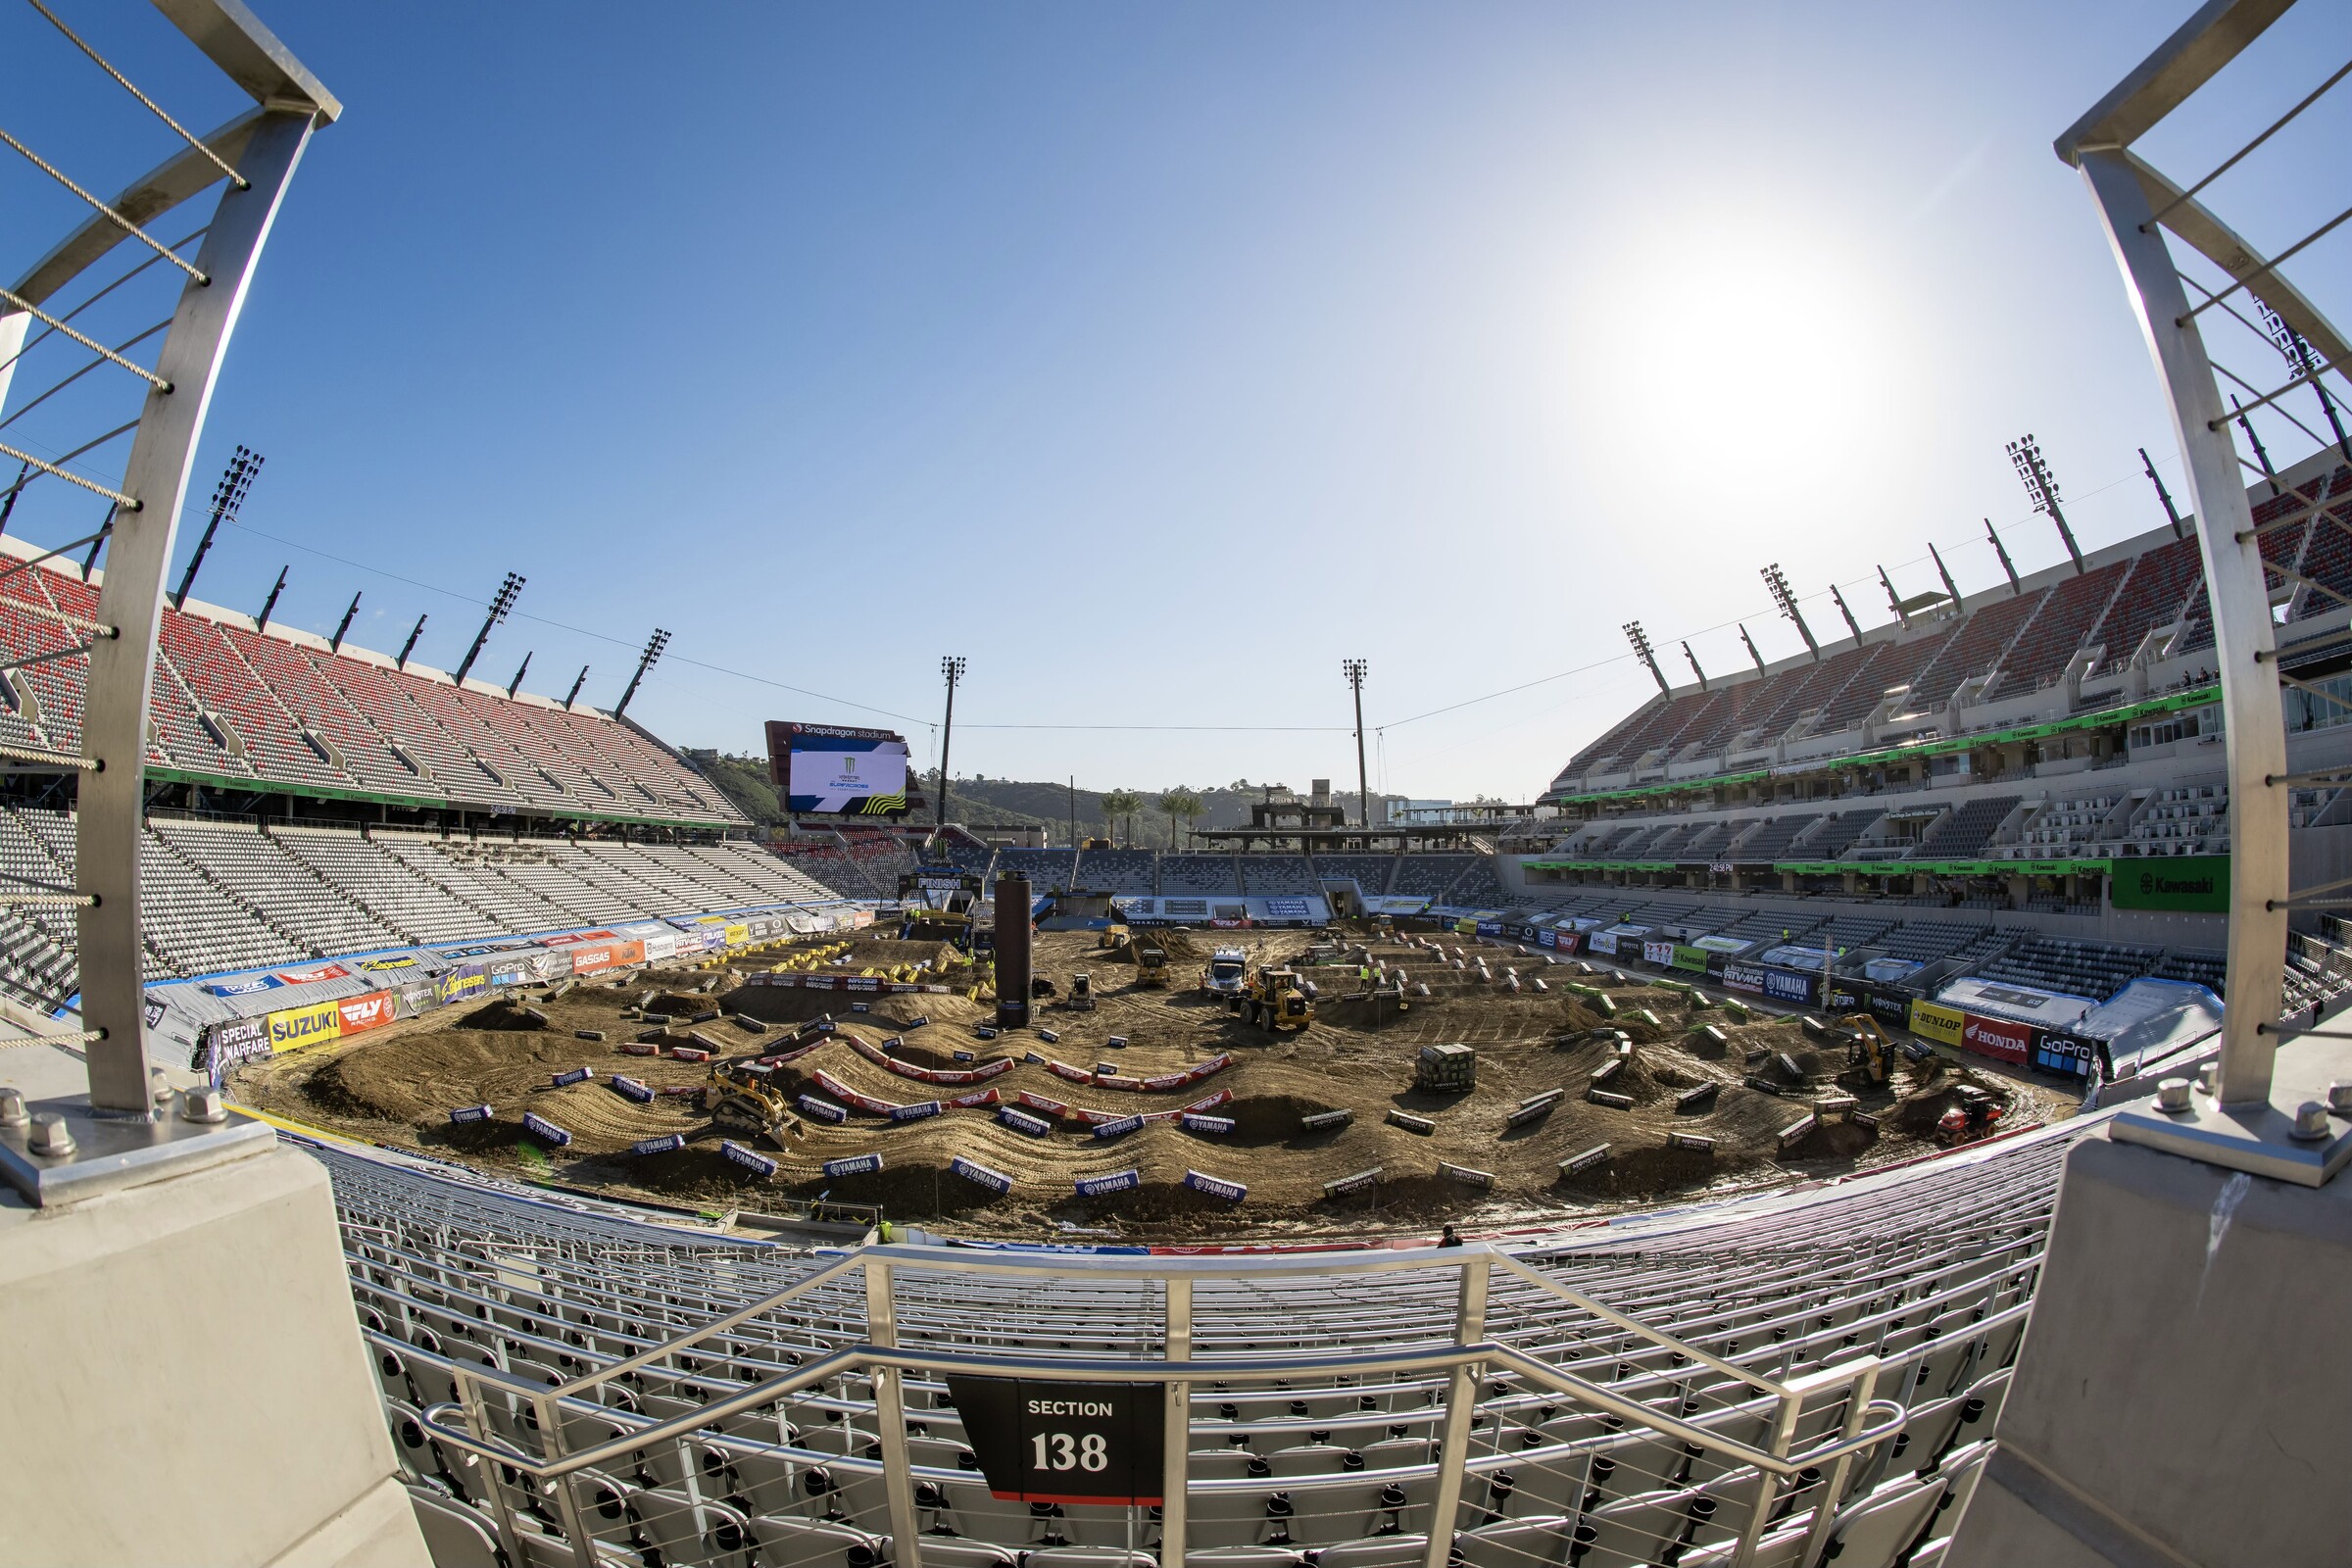 Dwell Updates from the 2023 San Diego Supercross